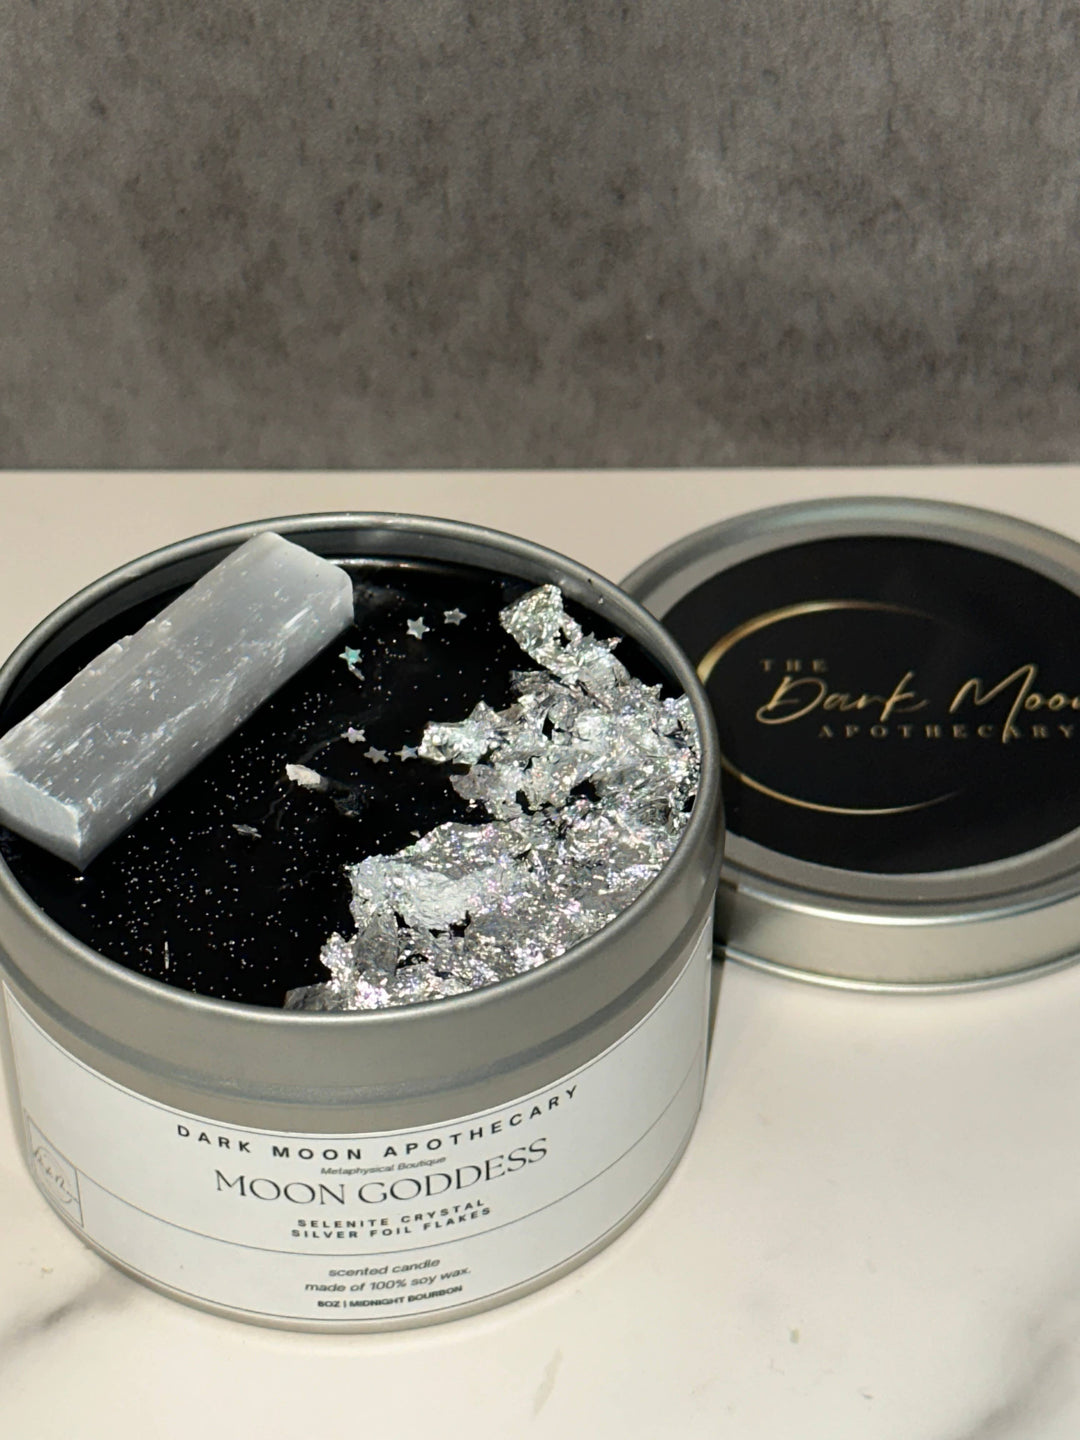 The Dark Moon Apothecary - Moon Goddess soy crystal candle w/ selenite.